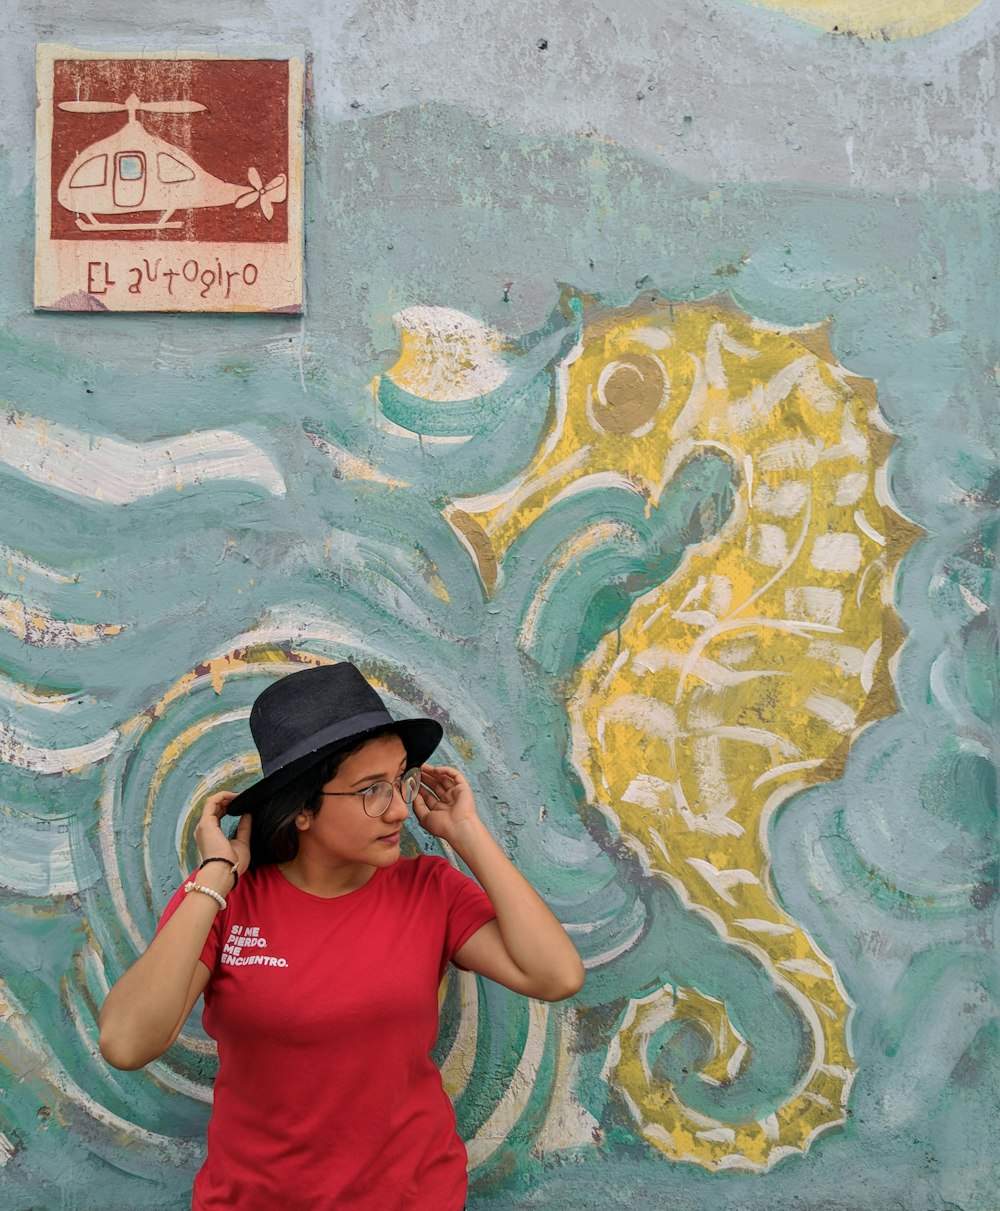 woman in red t-shirt and black hat leaning on wall with graffiti